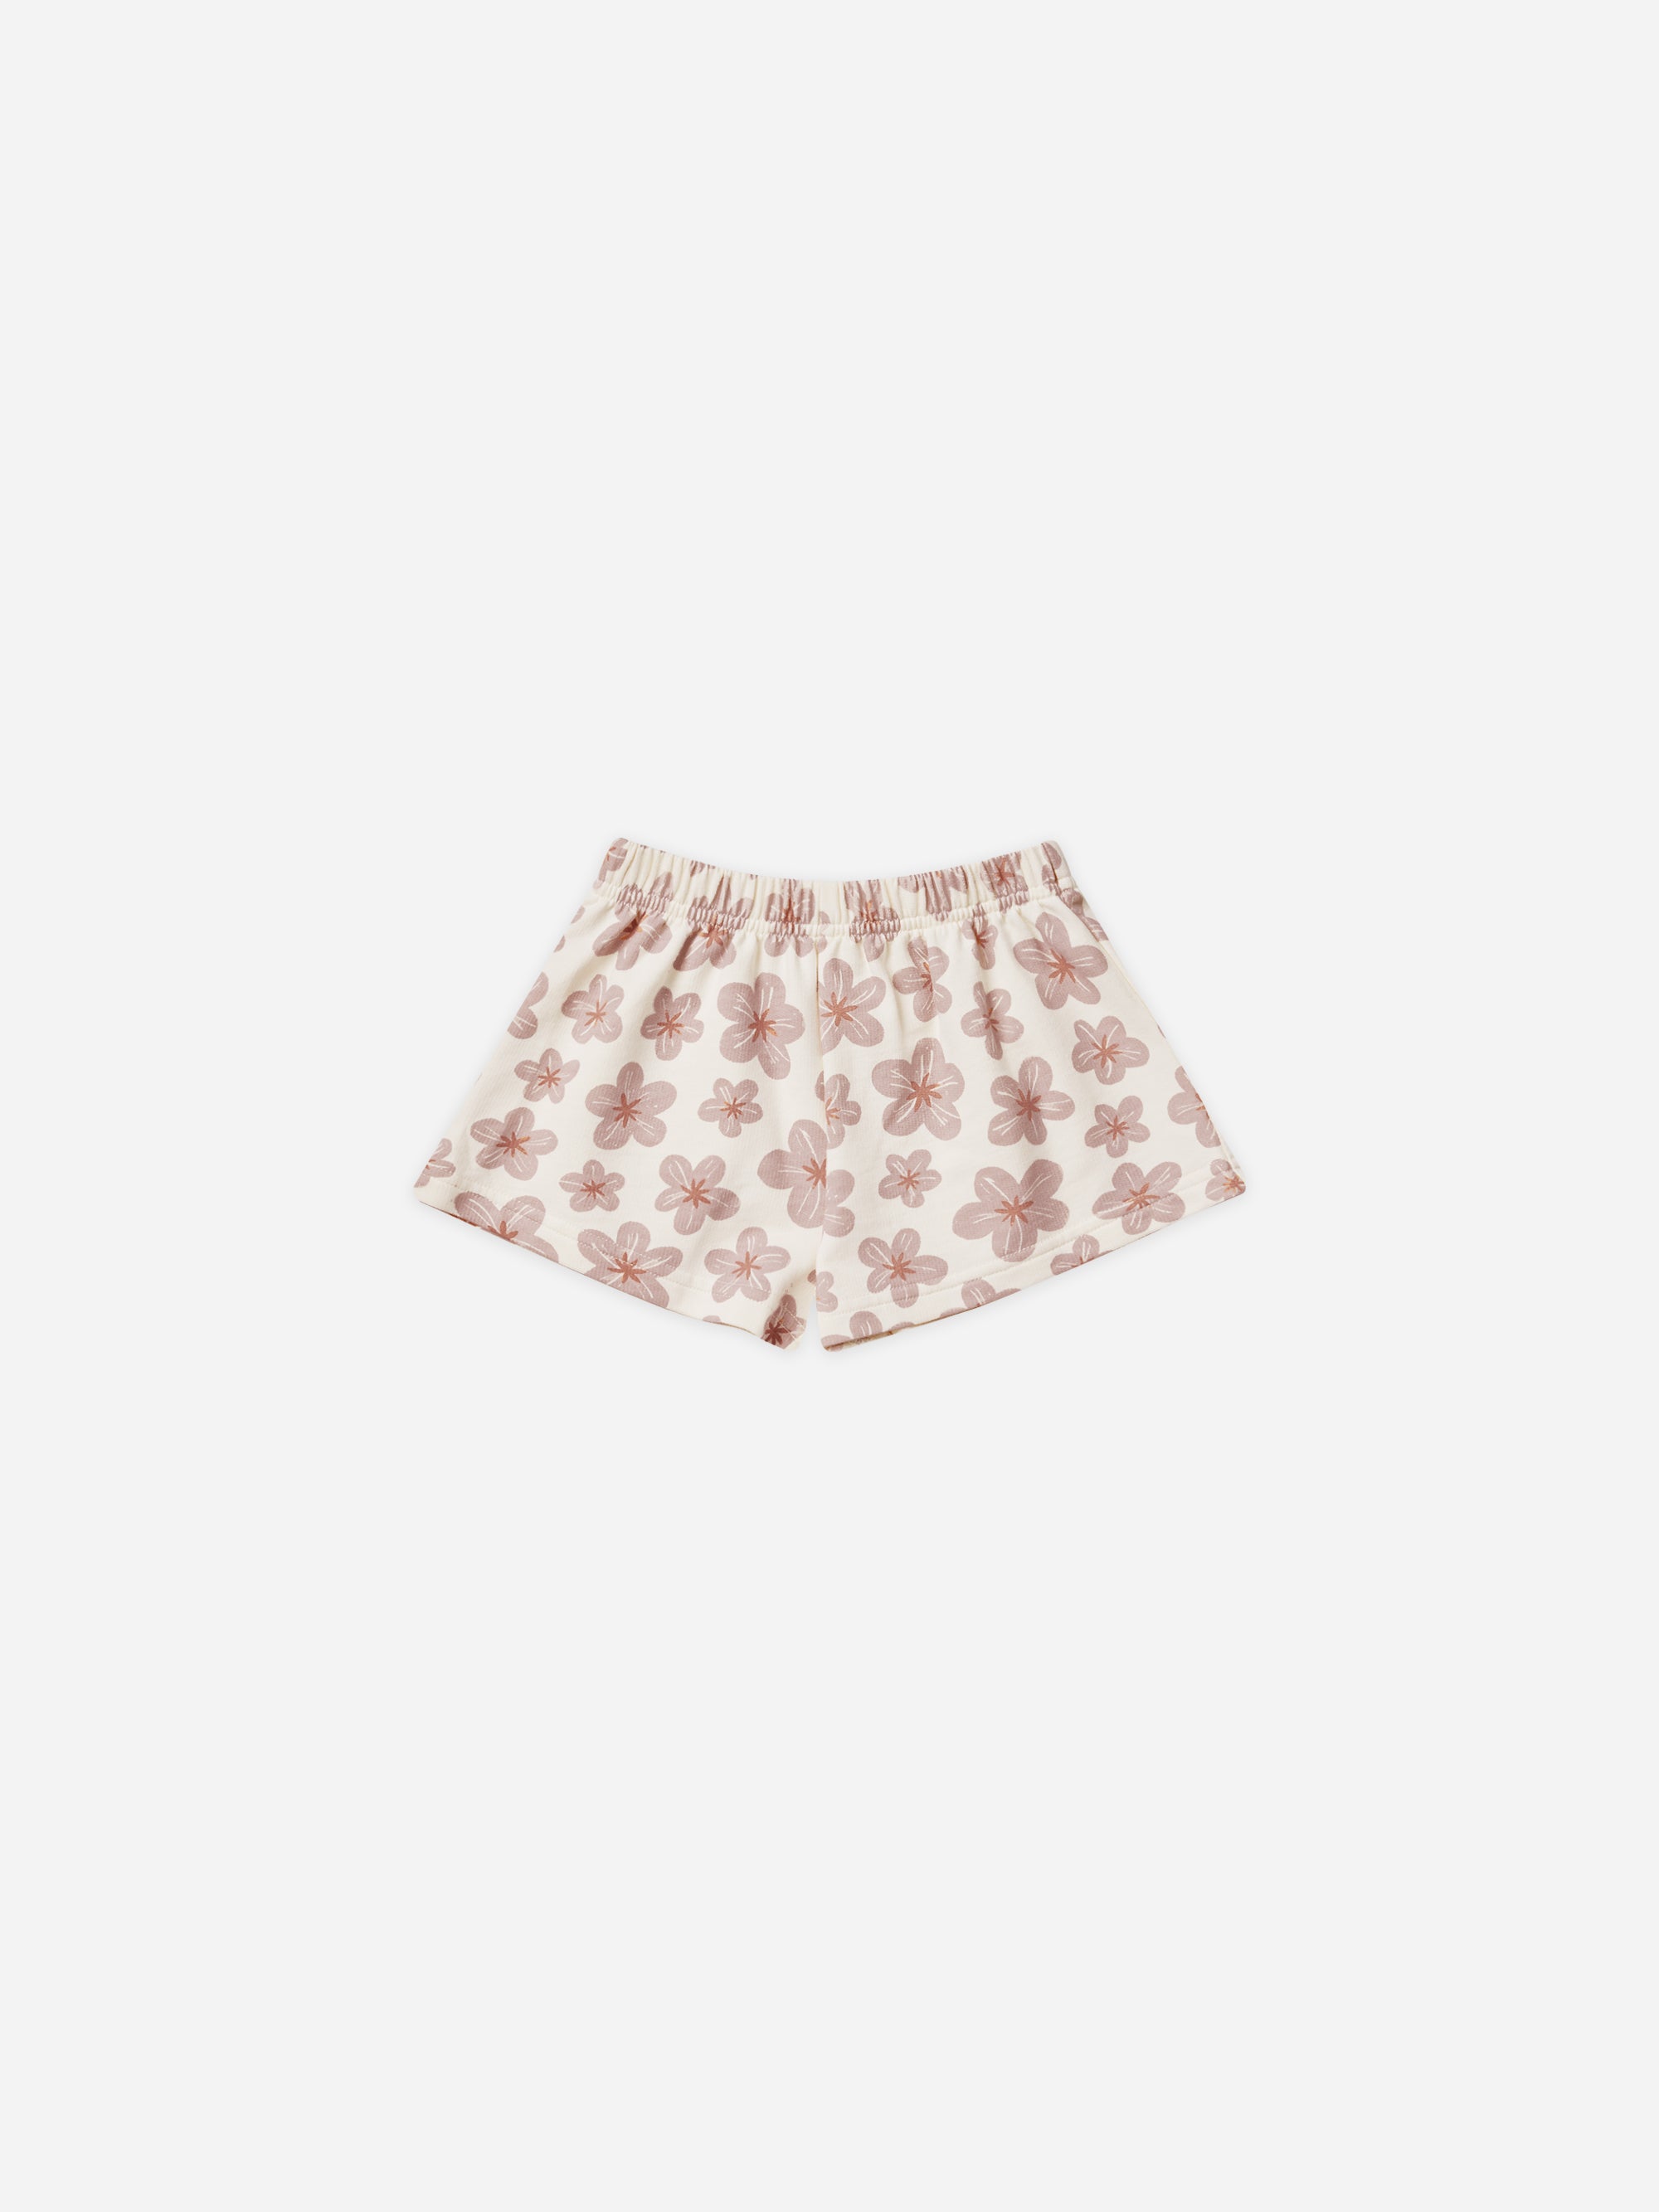 Track Short || Hibiscus - Rylee + Cru | Kids Clothes | Trendy Baby Clothes | Modern Infant Outfits |